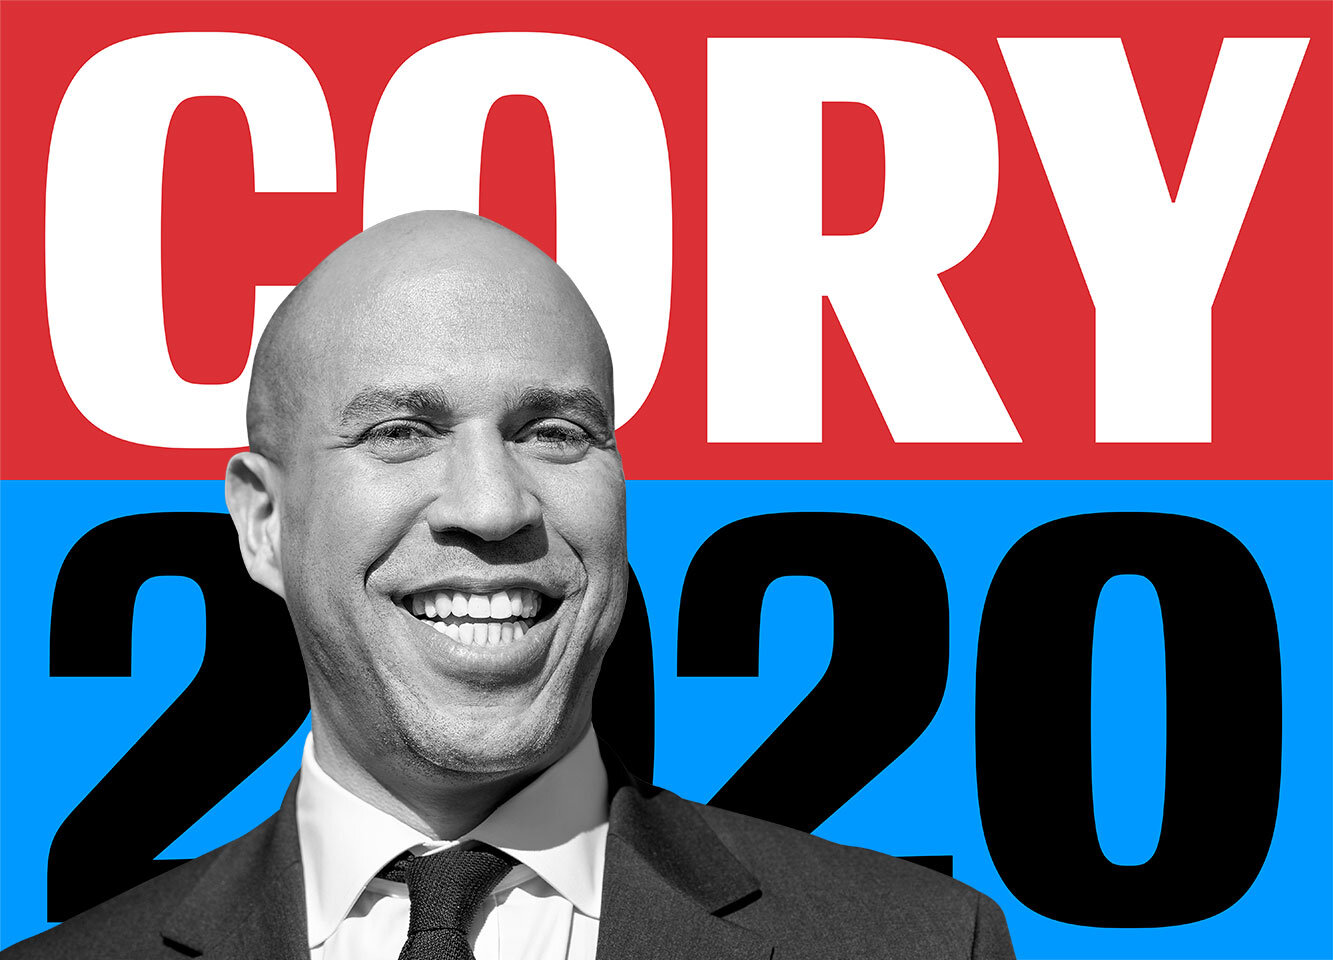 Together, America, We Will Say Goodbye To Cory Booker